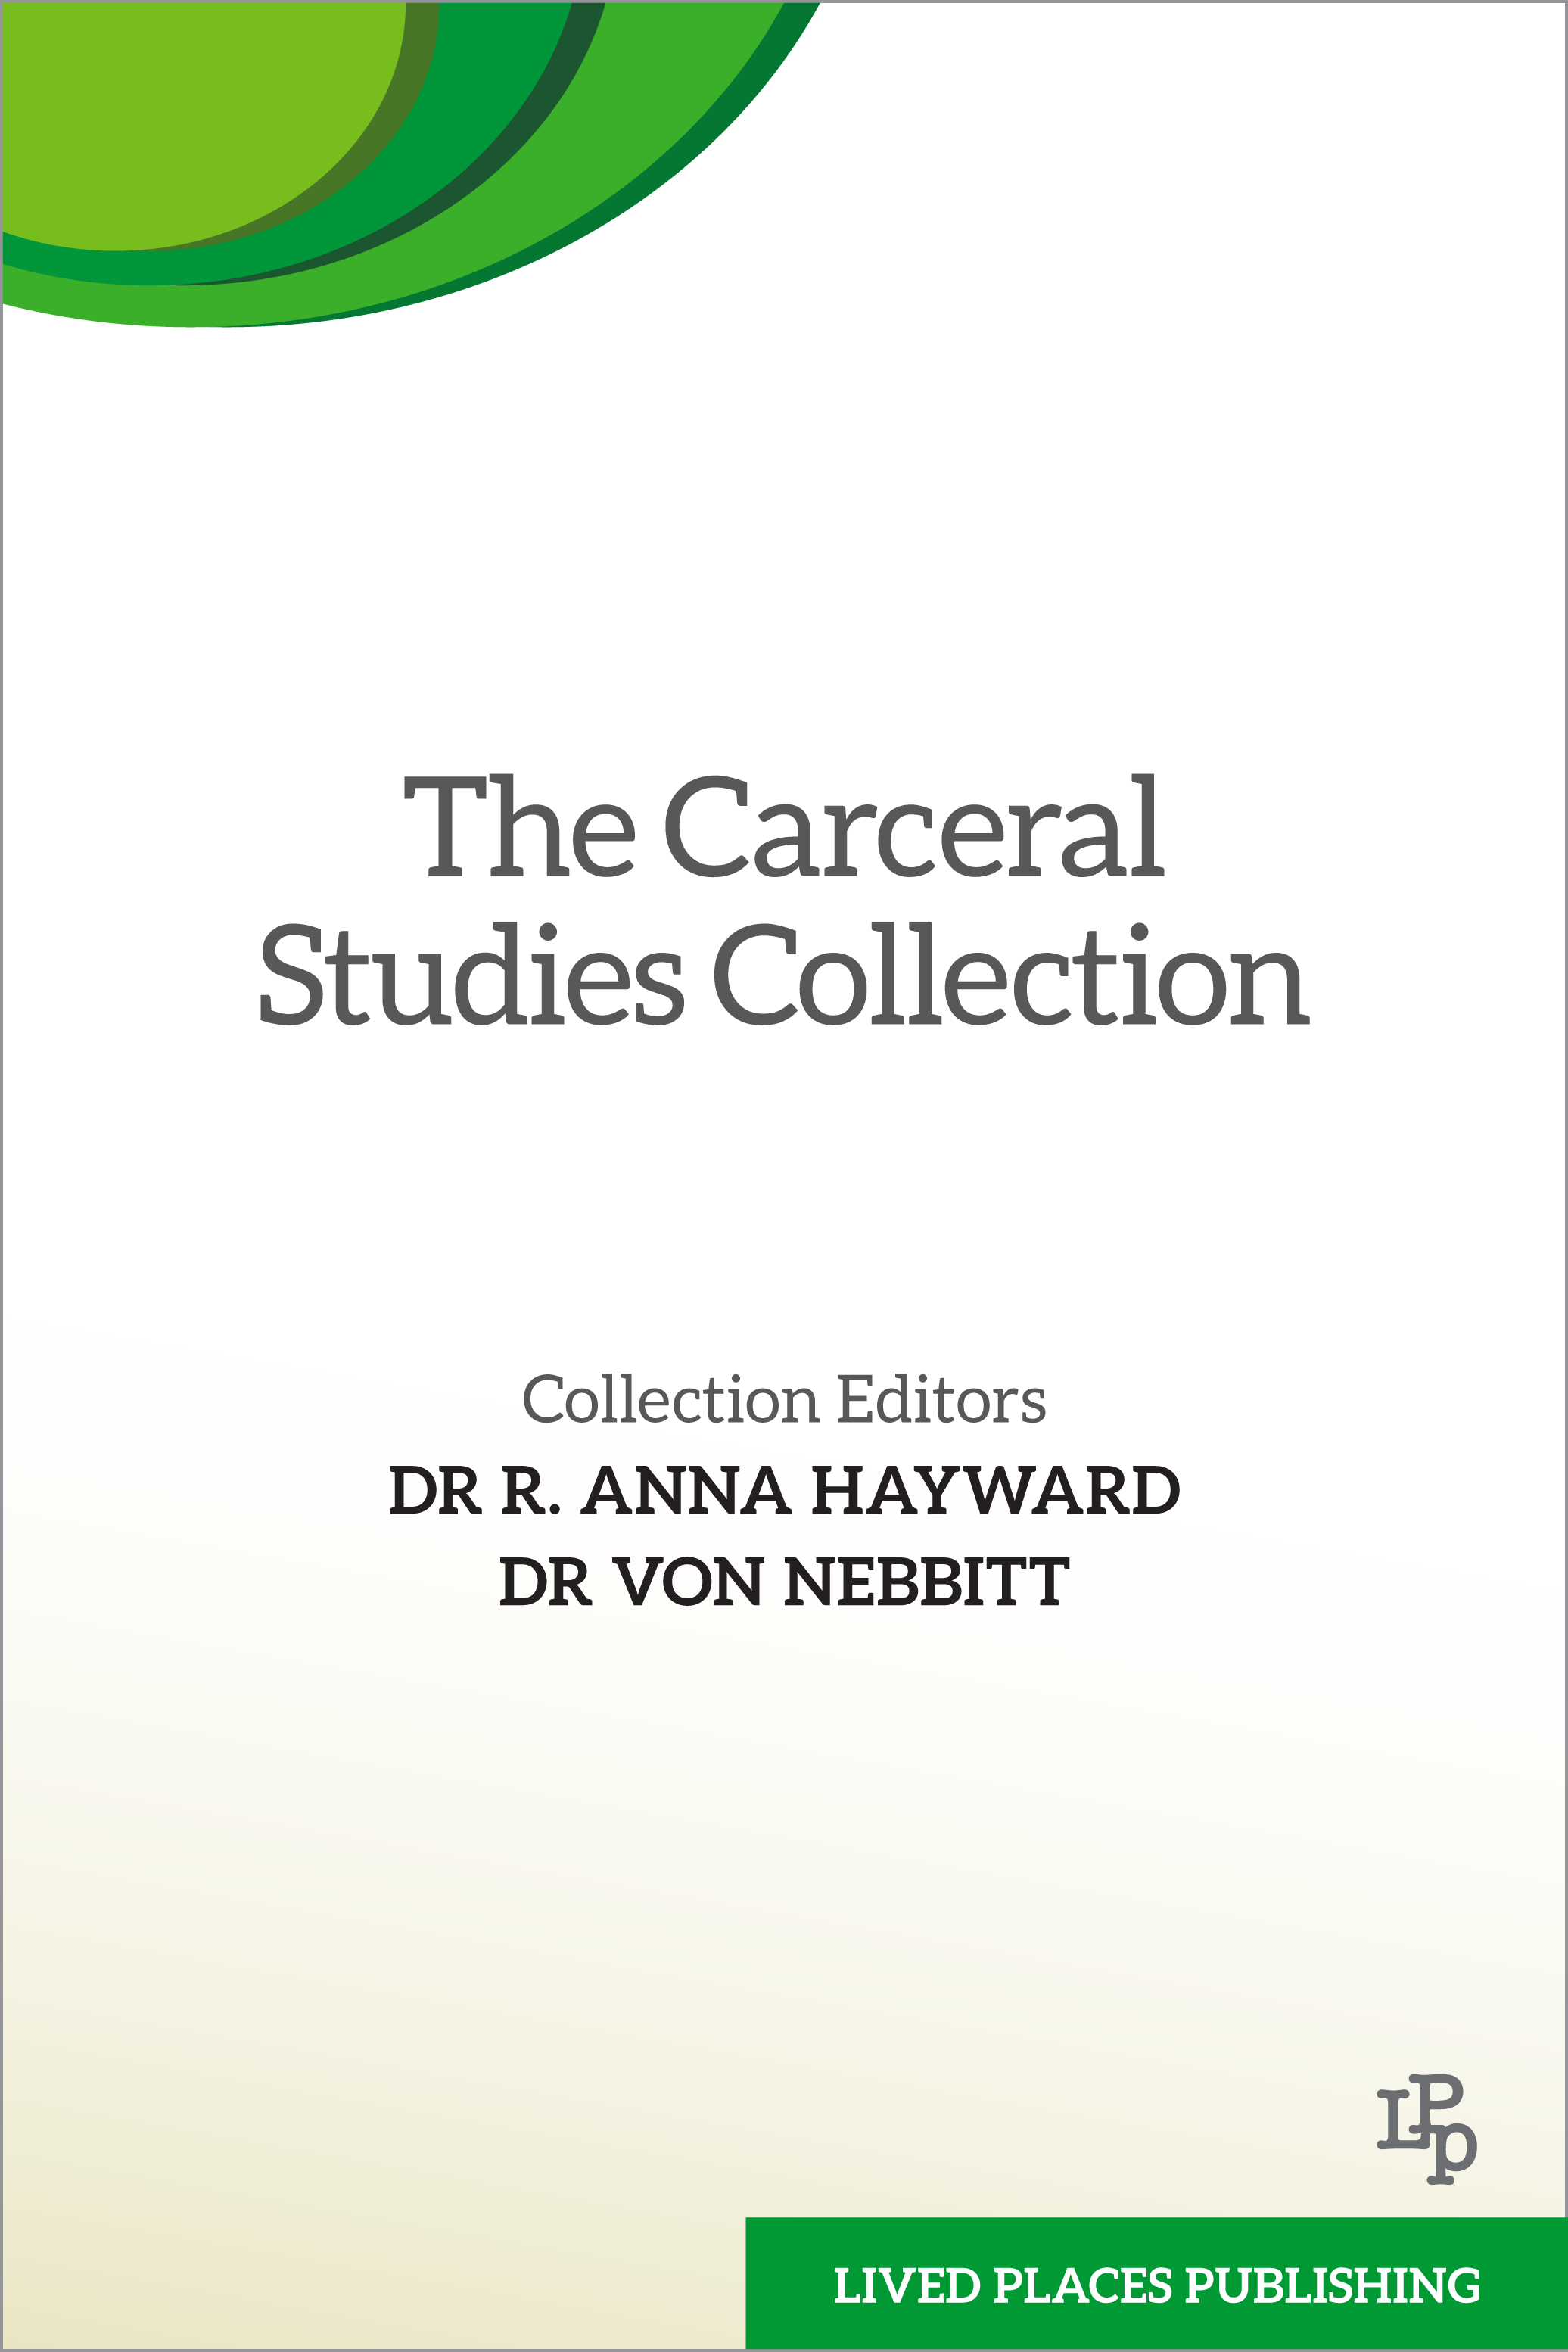 The Carceral Studies Collection. Published by Lived Places Publishing. Collection editors Dr R. Anna Hayward and Dr Von Nebbit. 